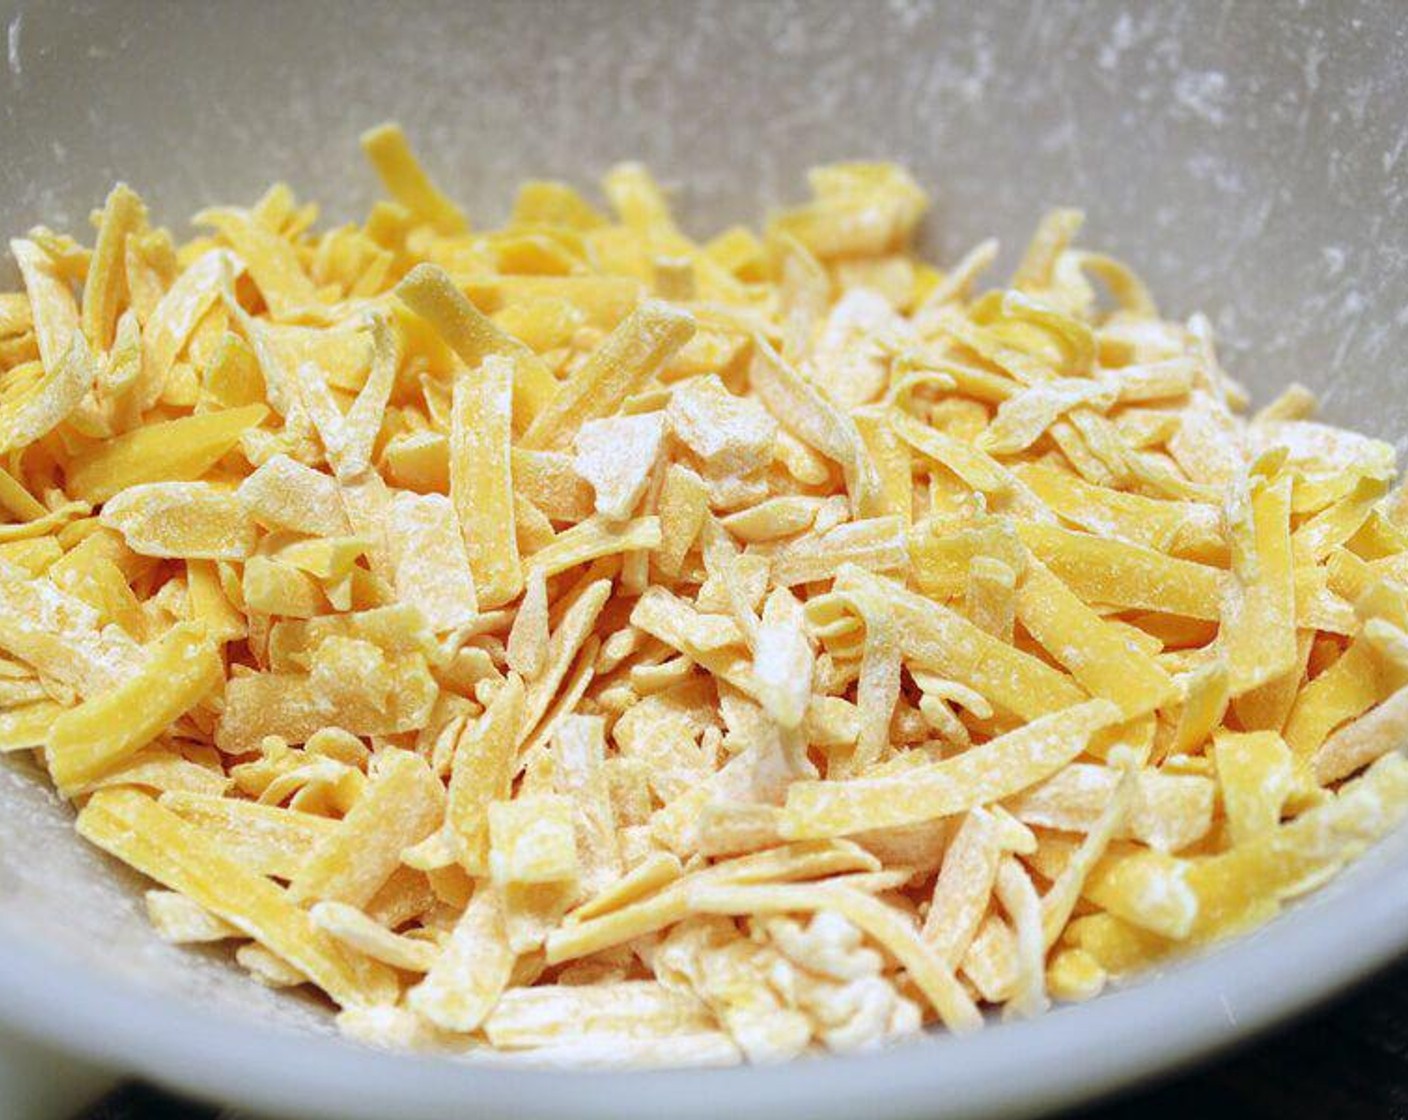 step 2 In a medium sized bowl, toss cheese with Corn Starch (1 Tbsp). Toss until well coated.